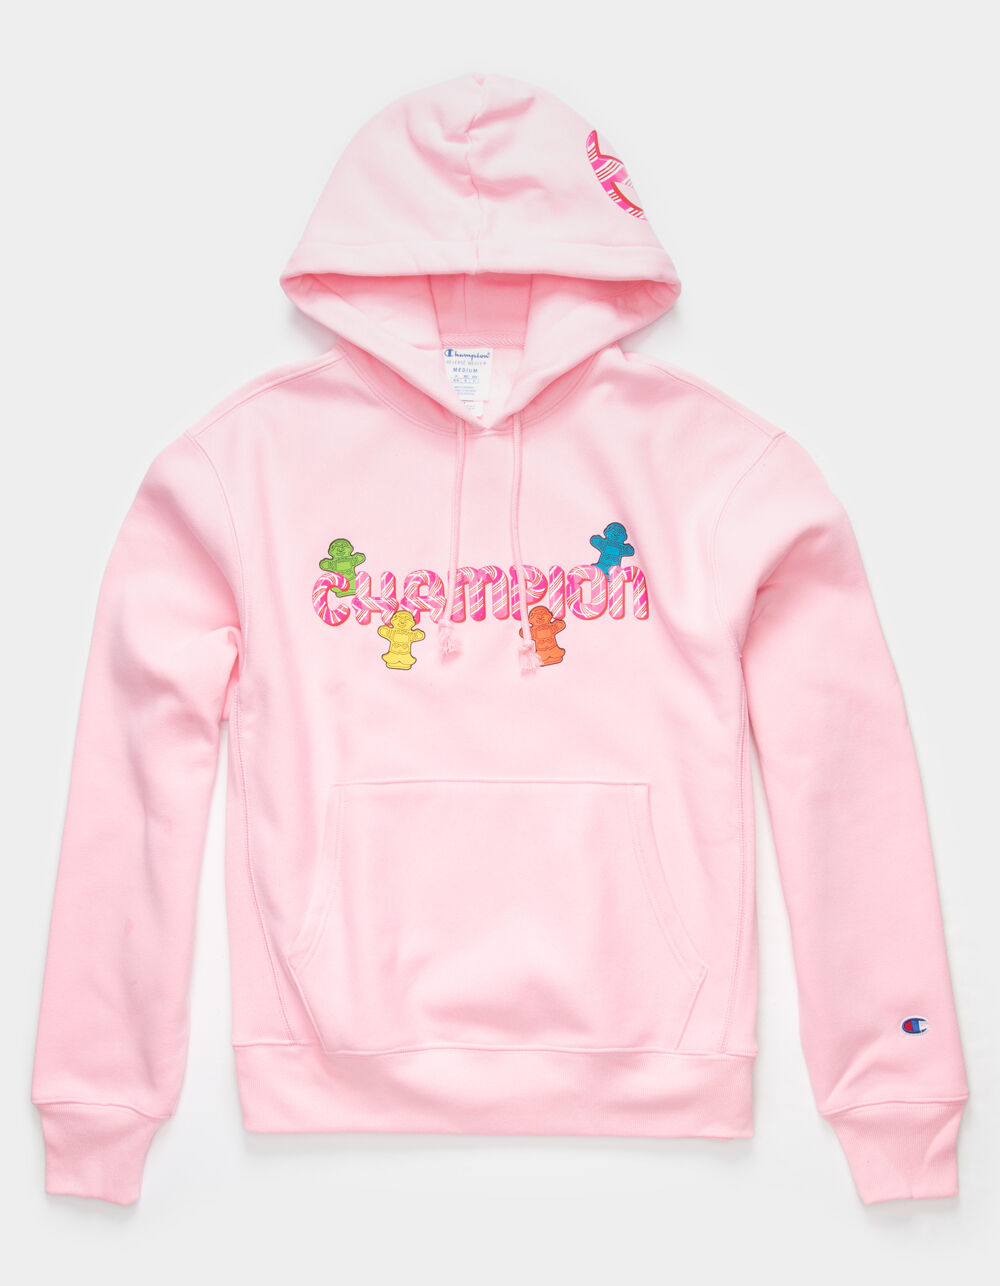 CHAMPION x Candy Land Reverse Weave Mens Hoodie